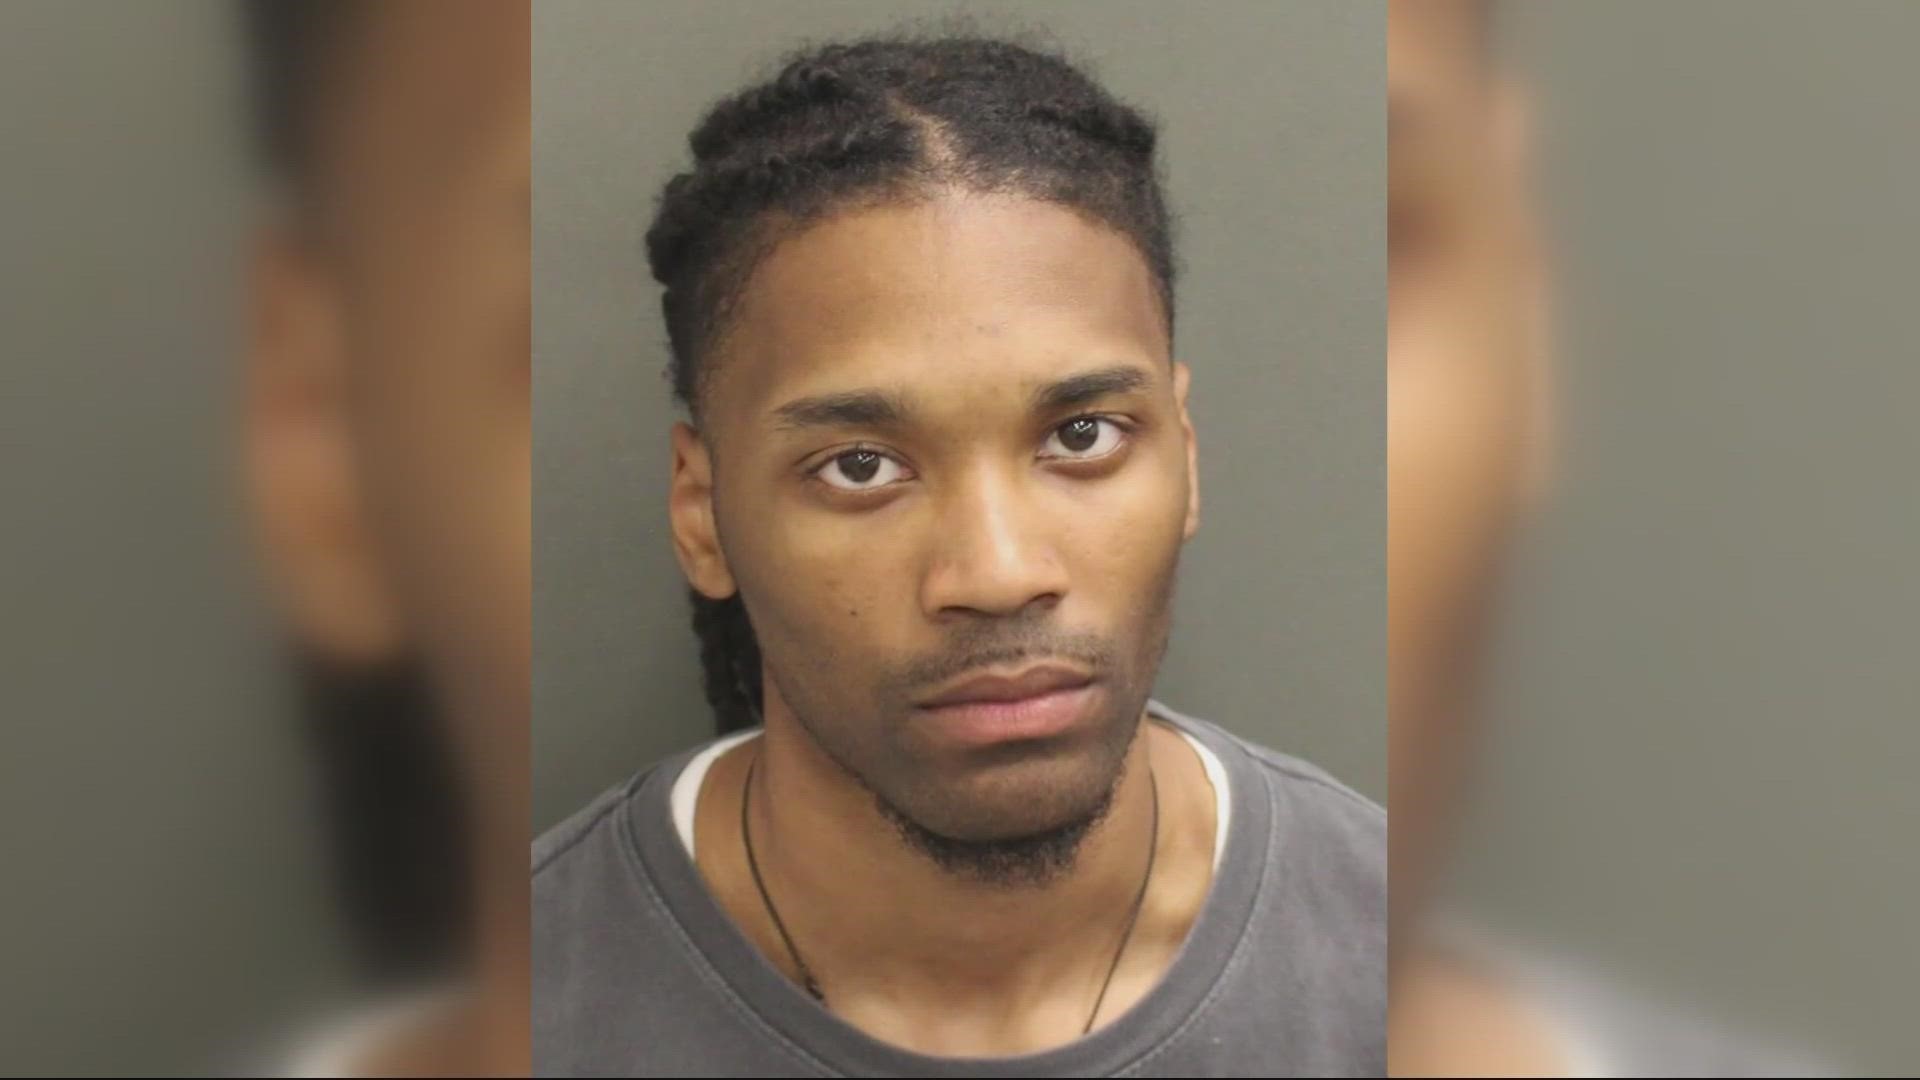 Kentravious Garard is the second arrest in the case. Marcel Johnson was arrested in connection to the shooting in January.